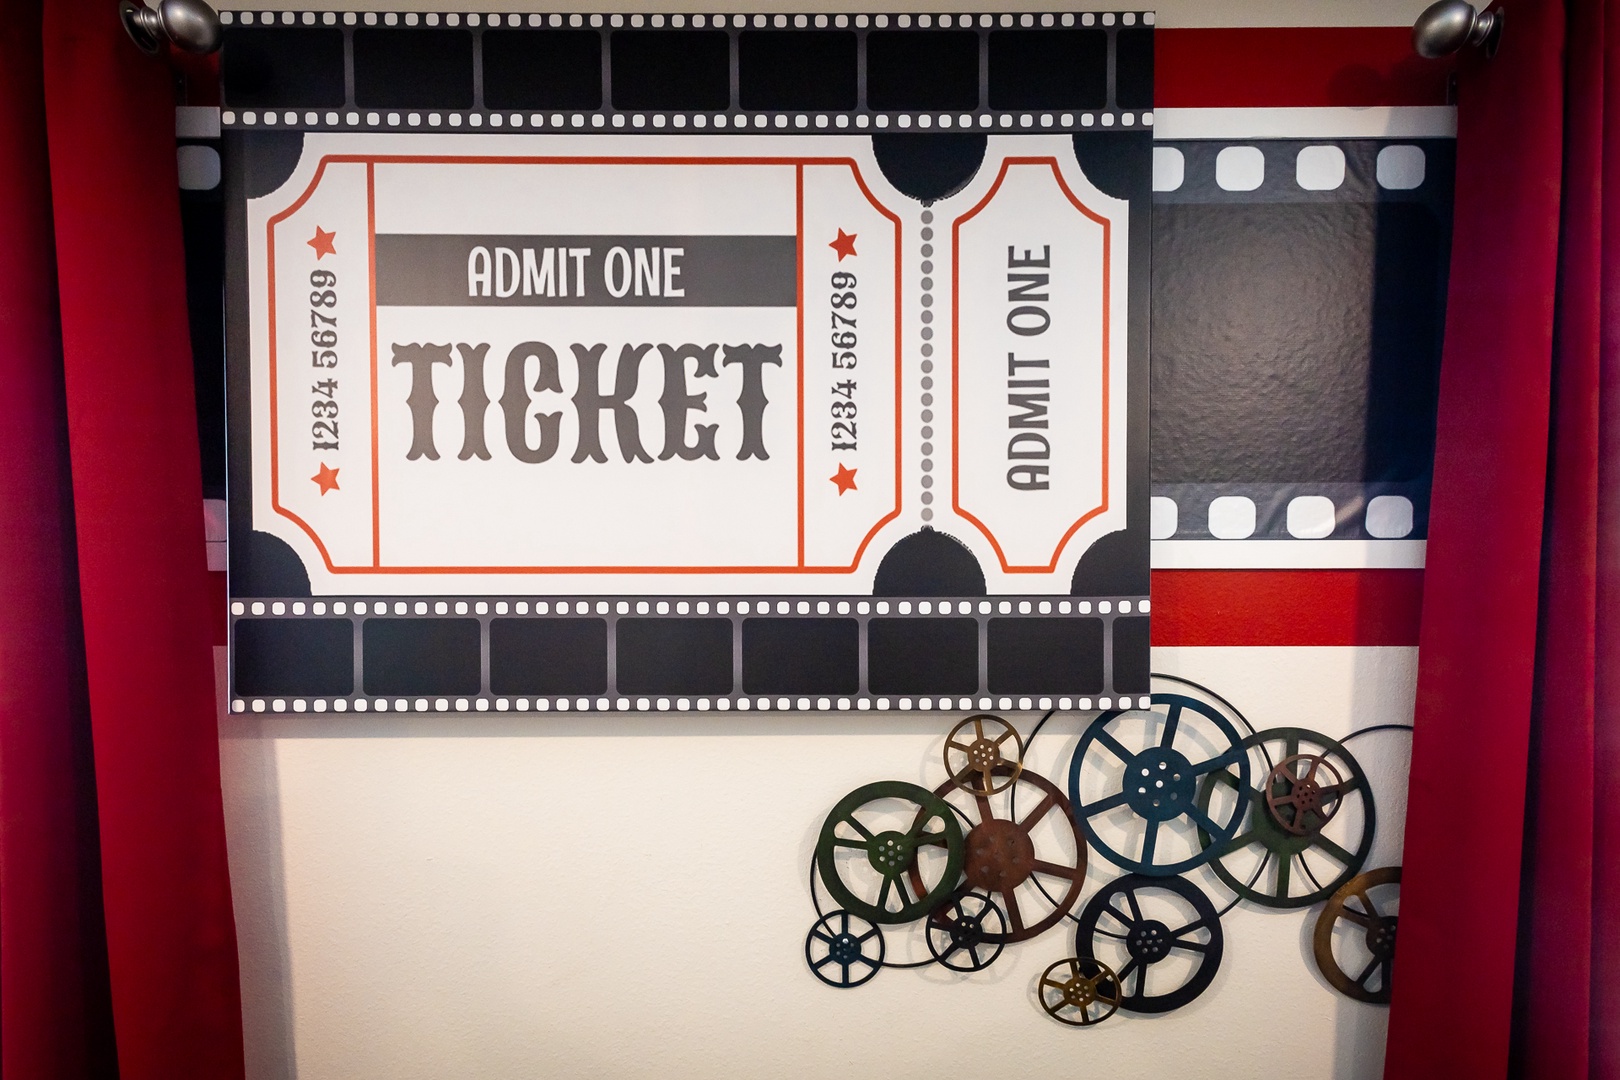 Head upstairs to the loft theater area to unwind with a movie!